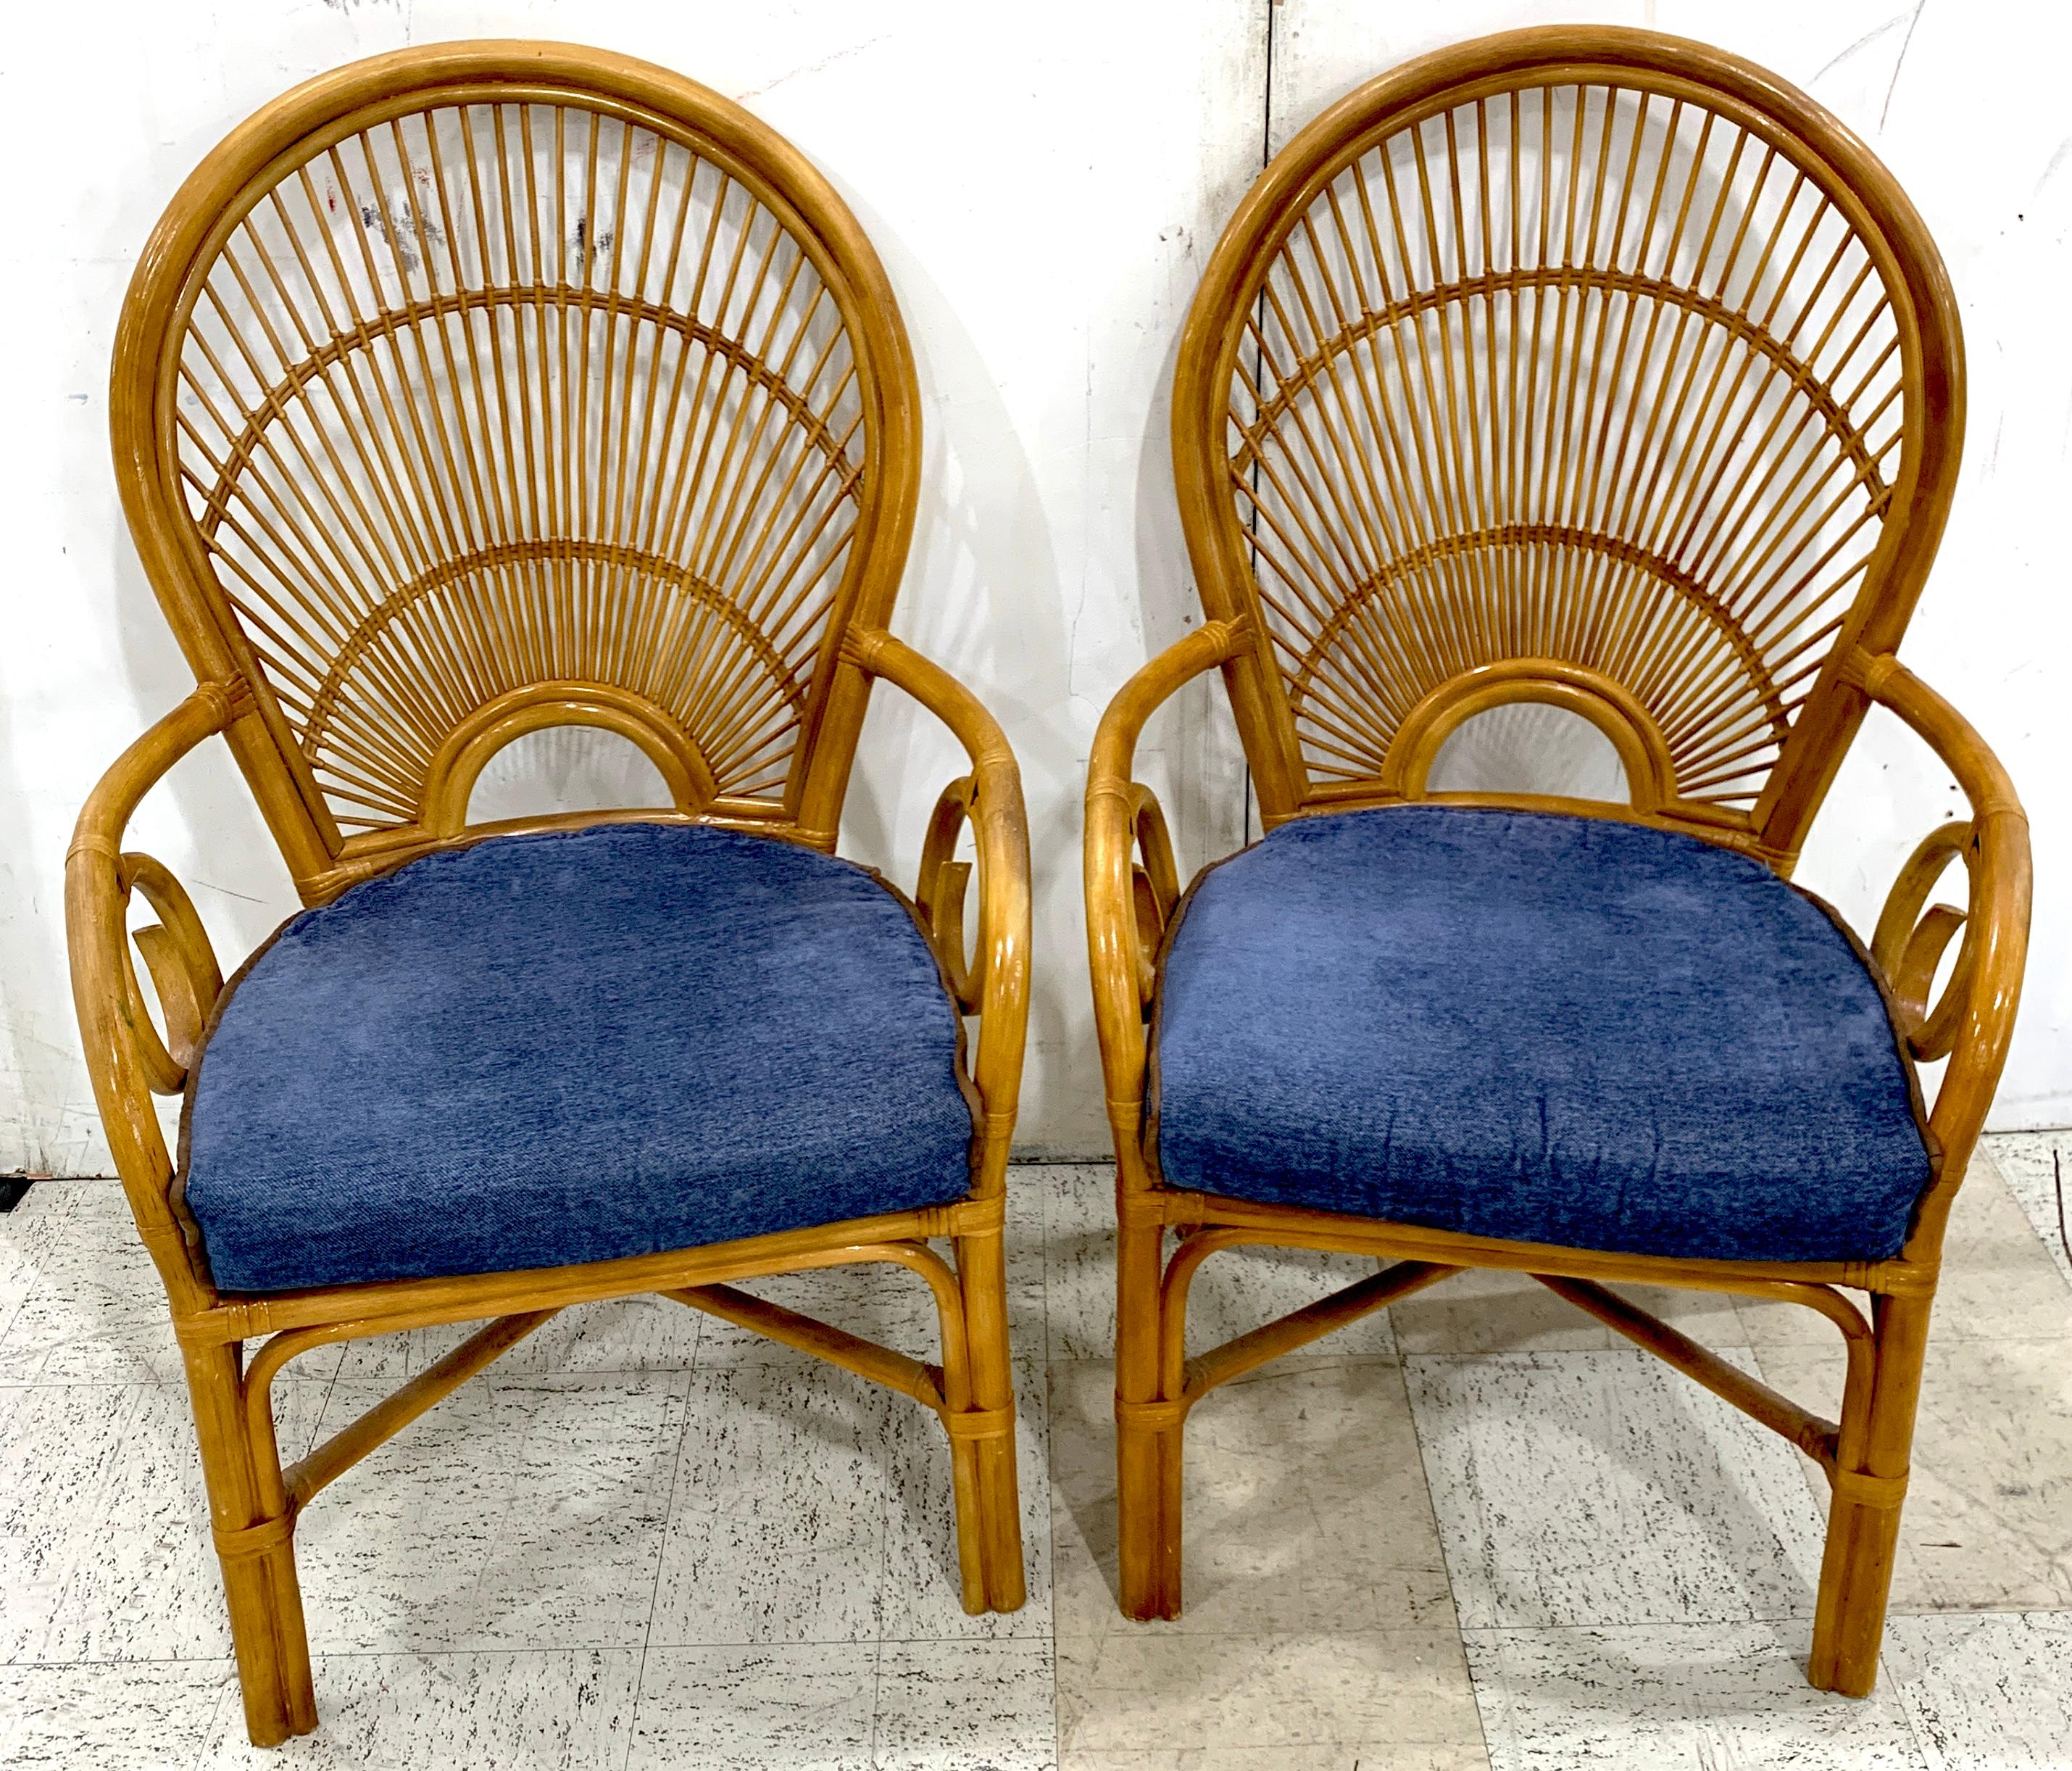 Pair of 1970s bamboo and rattan 'Sunrise' armchairs
Each one with finely woven reed and willow stylized back of three tier a 'Sunrise' (or Sunset)
With bamboo slat seats and vintage blue cushions
Measures: Each one is 43